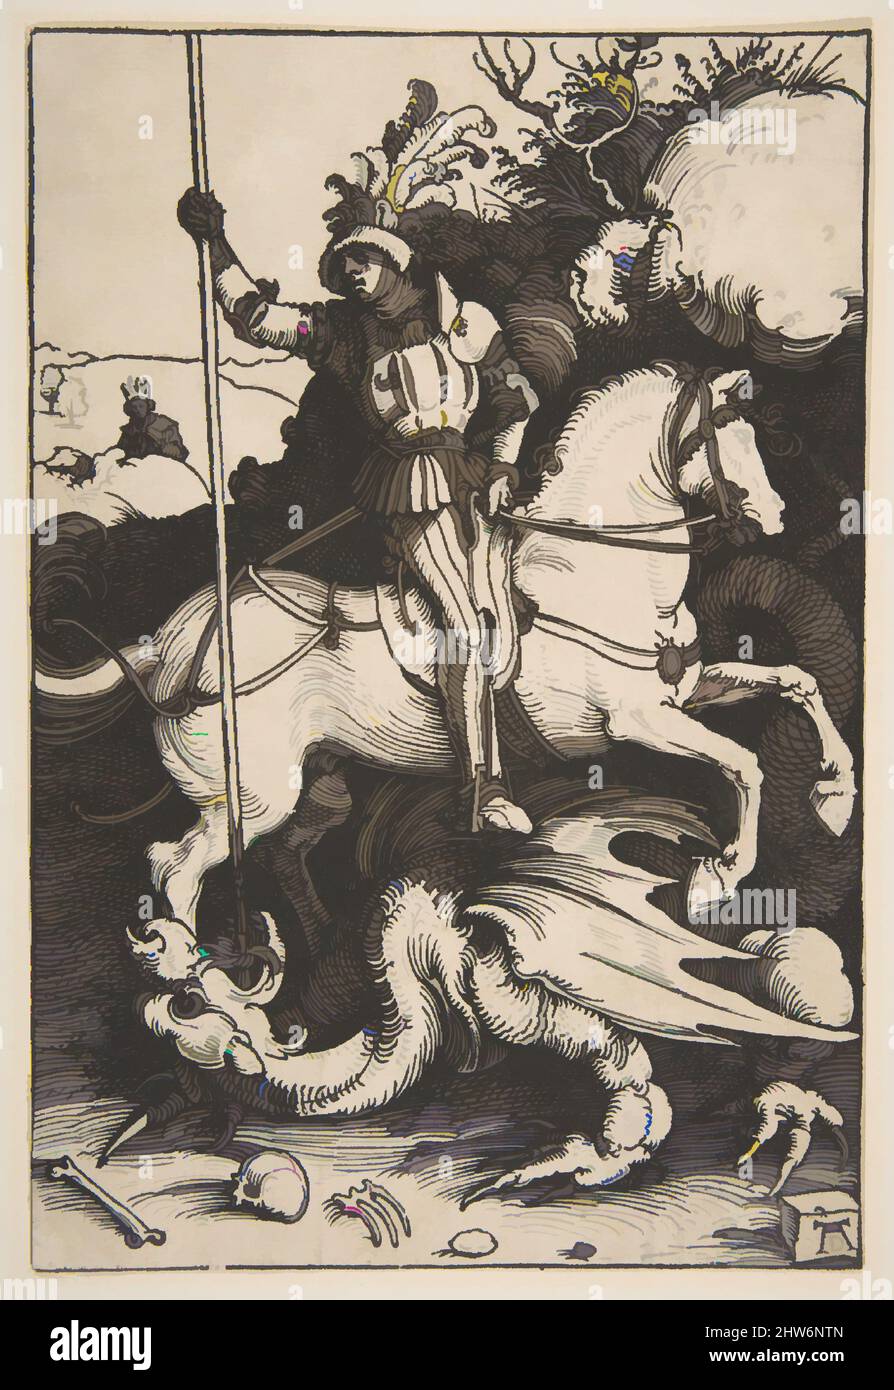 Art inspired by Saint George and the Dragon, ca. 1504, Woodcut, sheet: 8 1/4 x 5 9/16 in. (21 x 14.1 cm), Prints, Albrecht Dürer (German, Nuremberg 1471–1528 Nuremberg, Classic works modernized by Artotop with a splash of modernity. Shapes, color and value, eye-catching visual impact on art. Emotions through freedom of artworks in a contemporary way. A timeless message pursuing a wildly creative new direction. Artists turning to the digital medium and creating the Artotop NFT Stock Photo